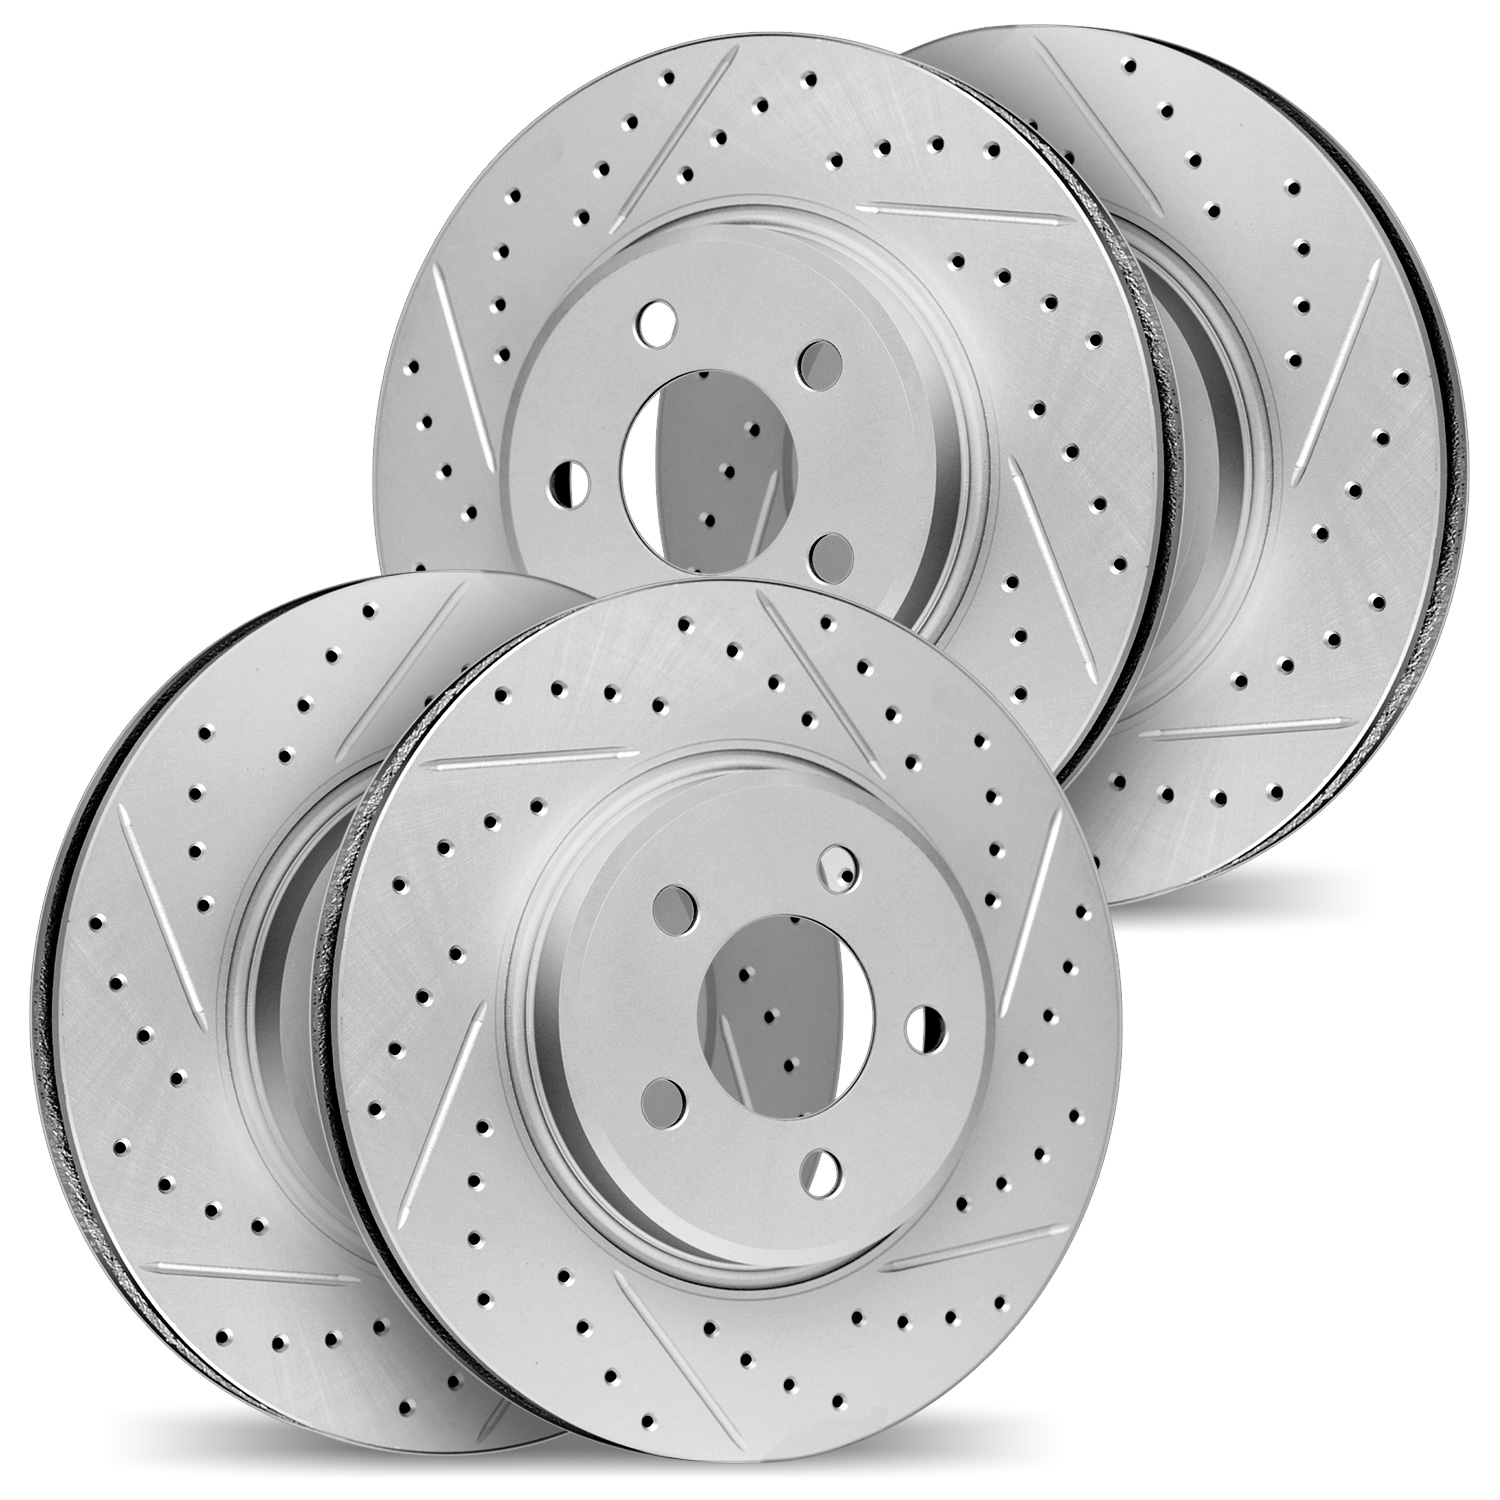 2004-80025 Geoperformance Drilled/Slotted Brake Rotors, 2007-2015 Ford/Lincoln/Mercury/Mazda, Position: Front and Rear